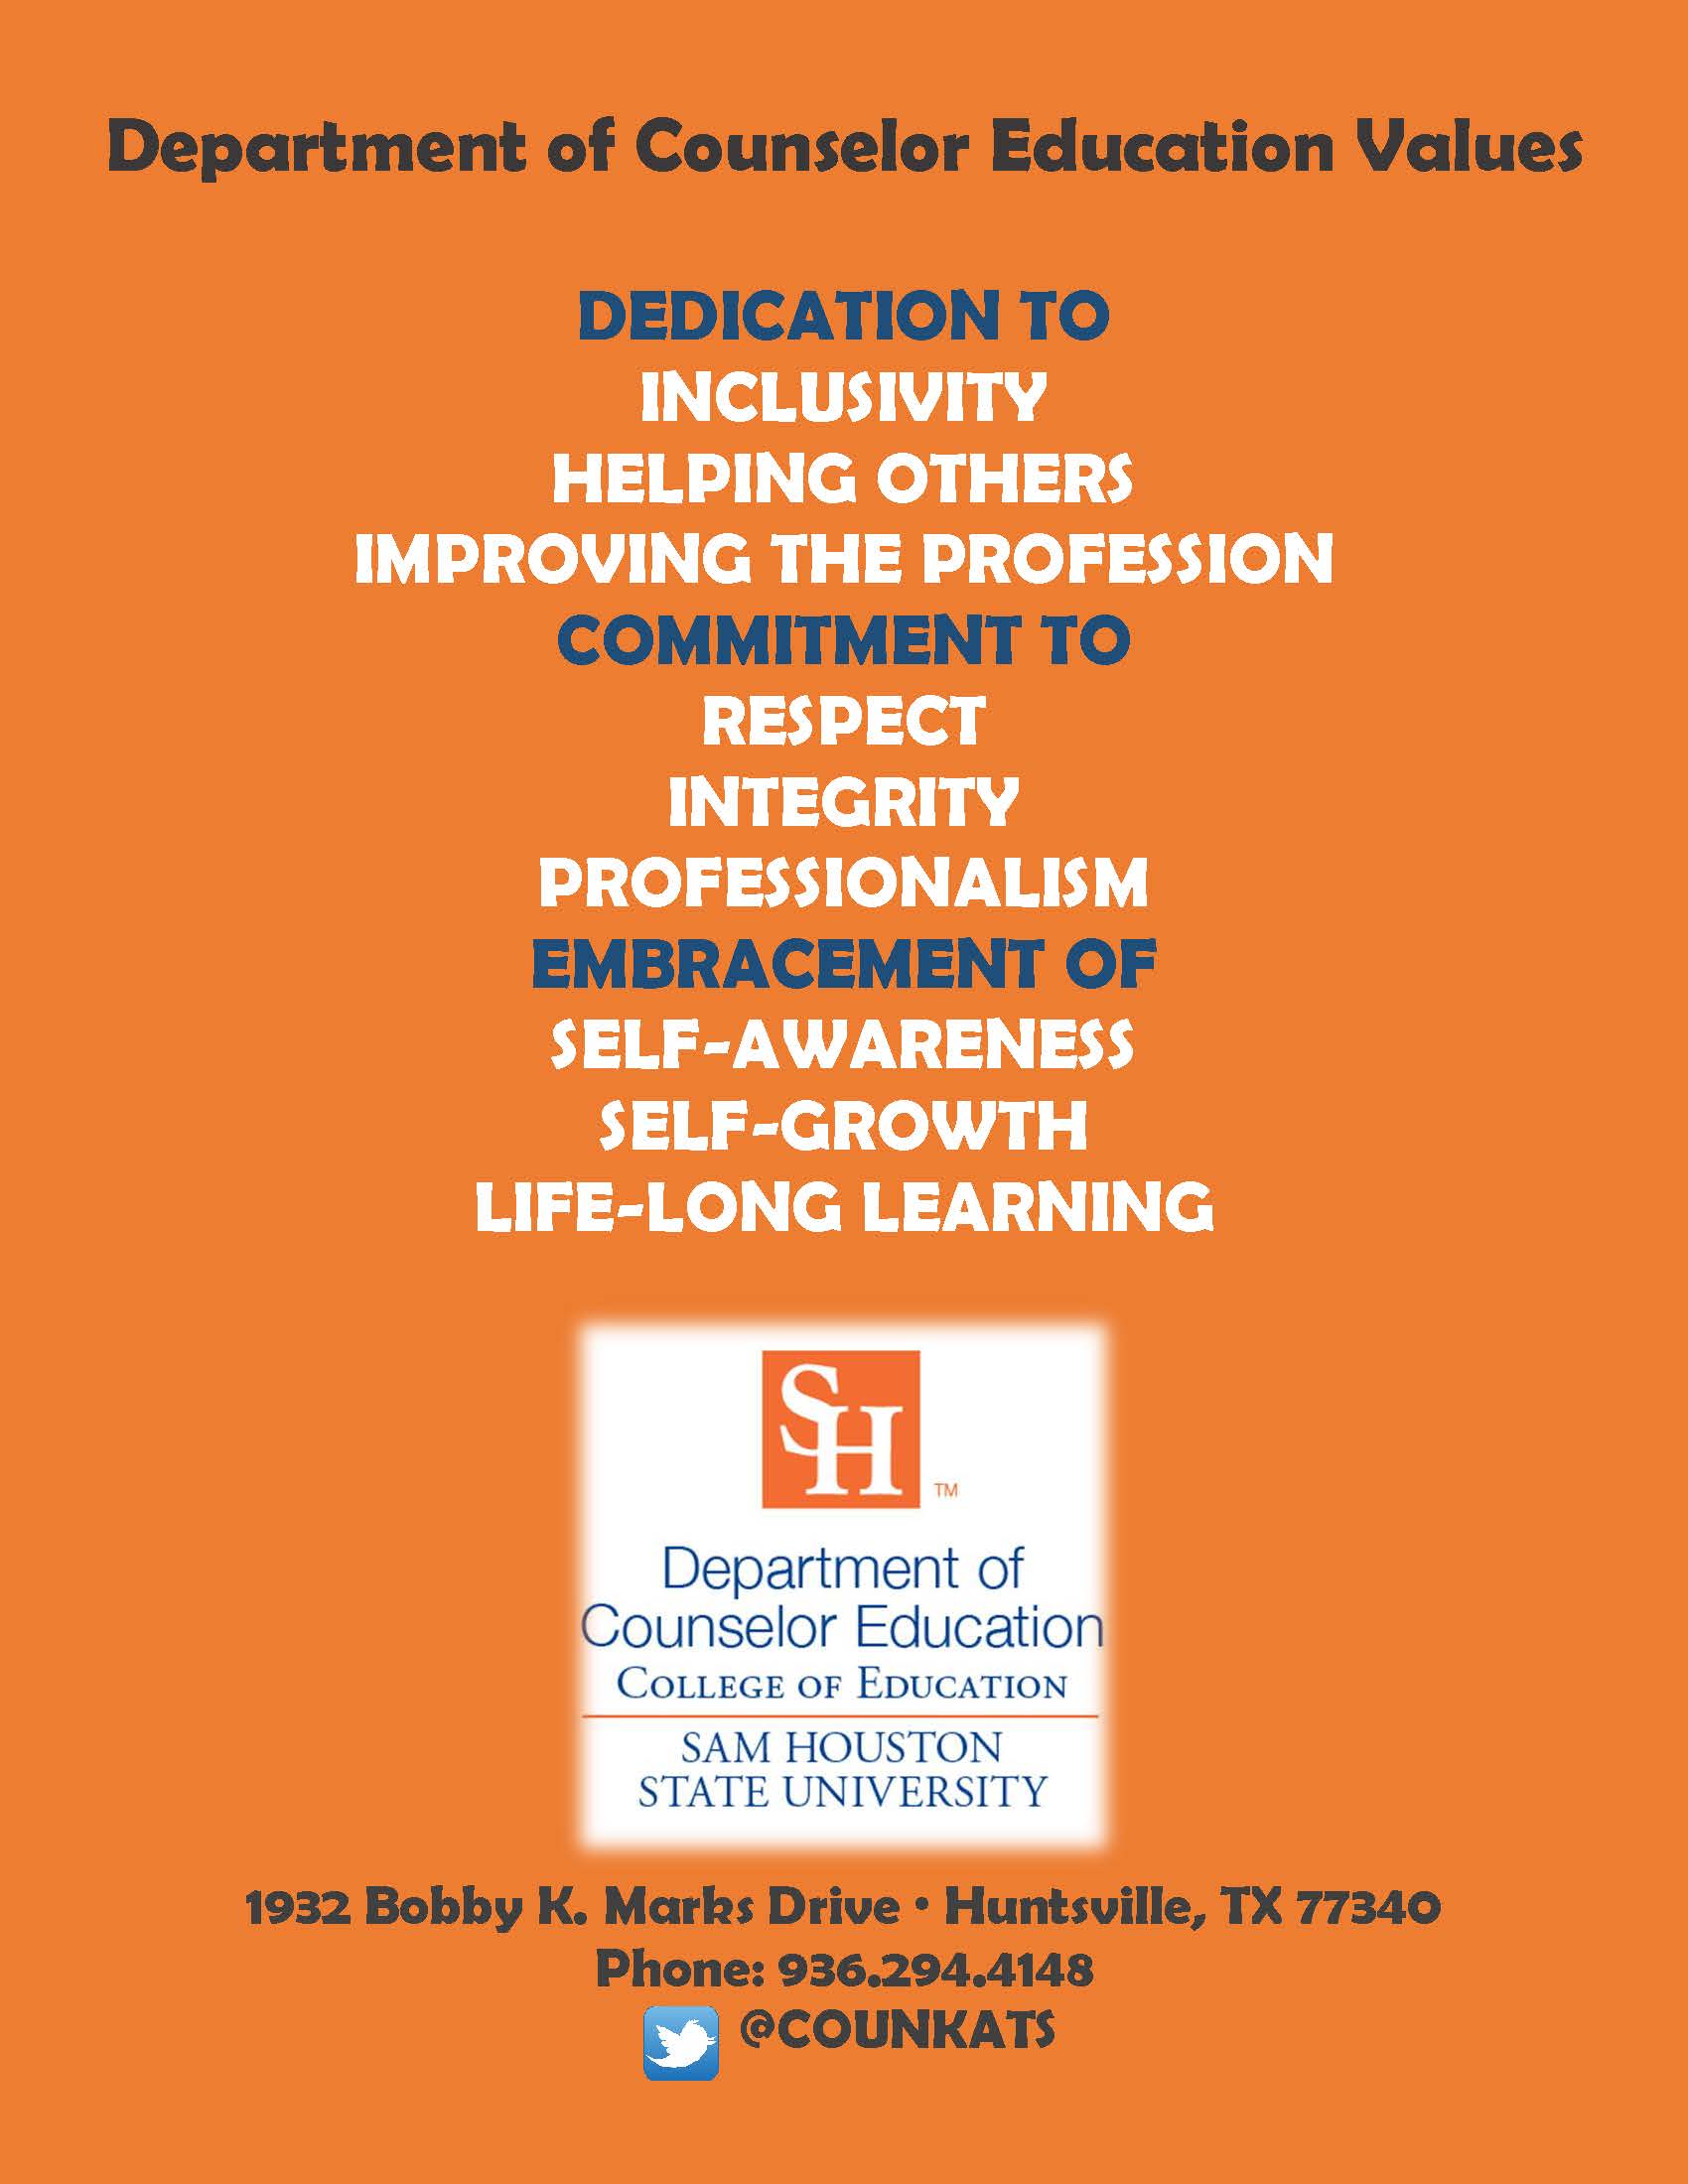 Department of Counselor Education Values: Dedication to inclusivity, helping others, improving the profession. Commitment to respect, integrity, professionalism. Embracement of self-awareness, self-growth, life-long learning.